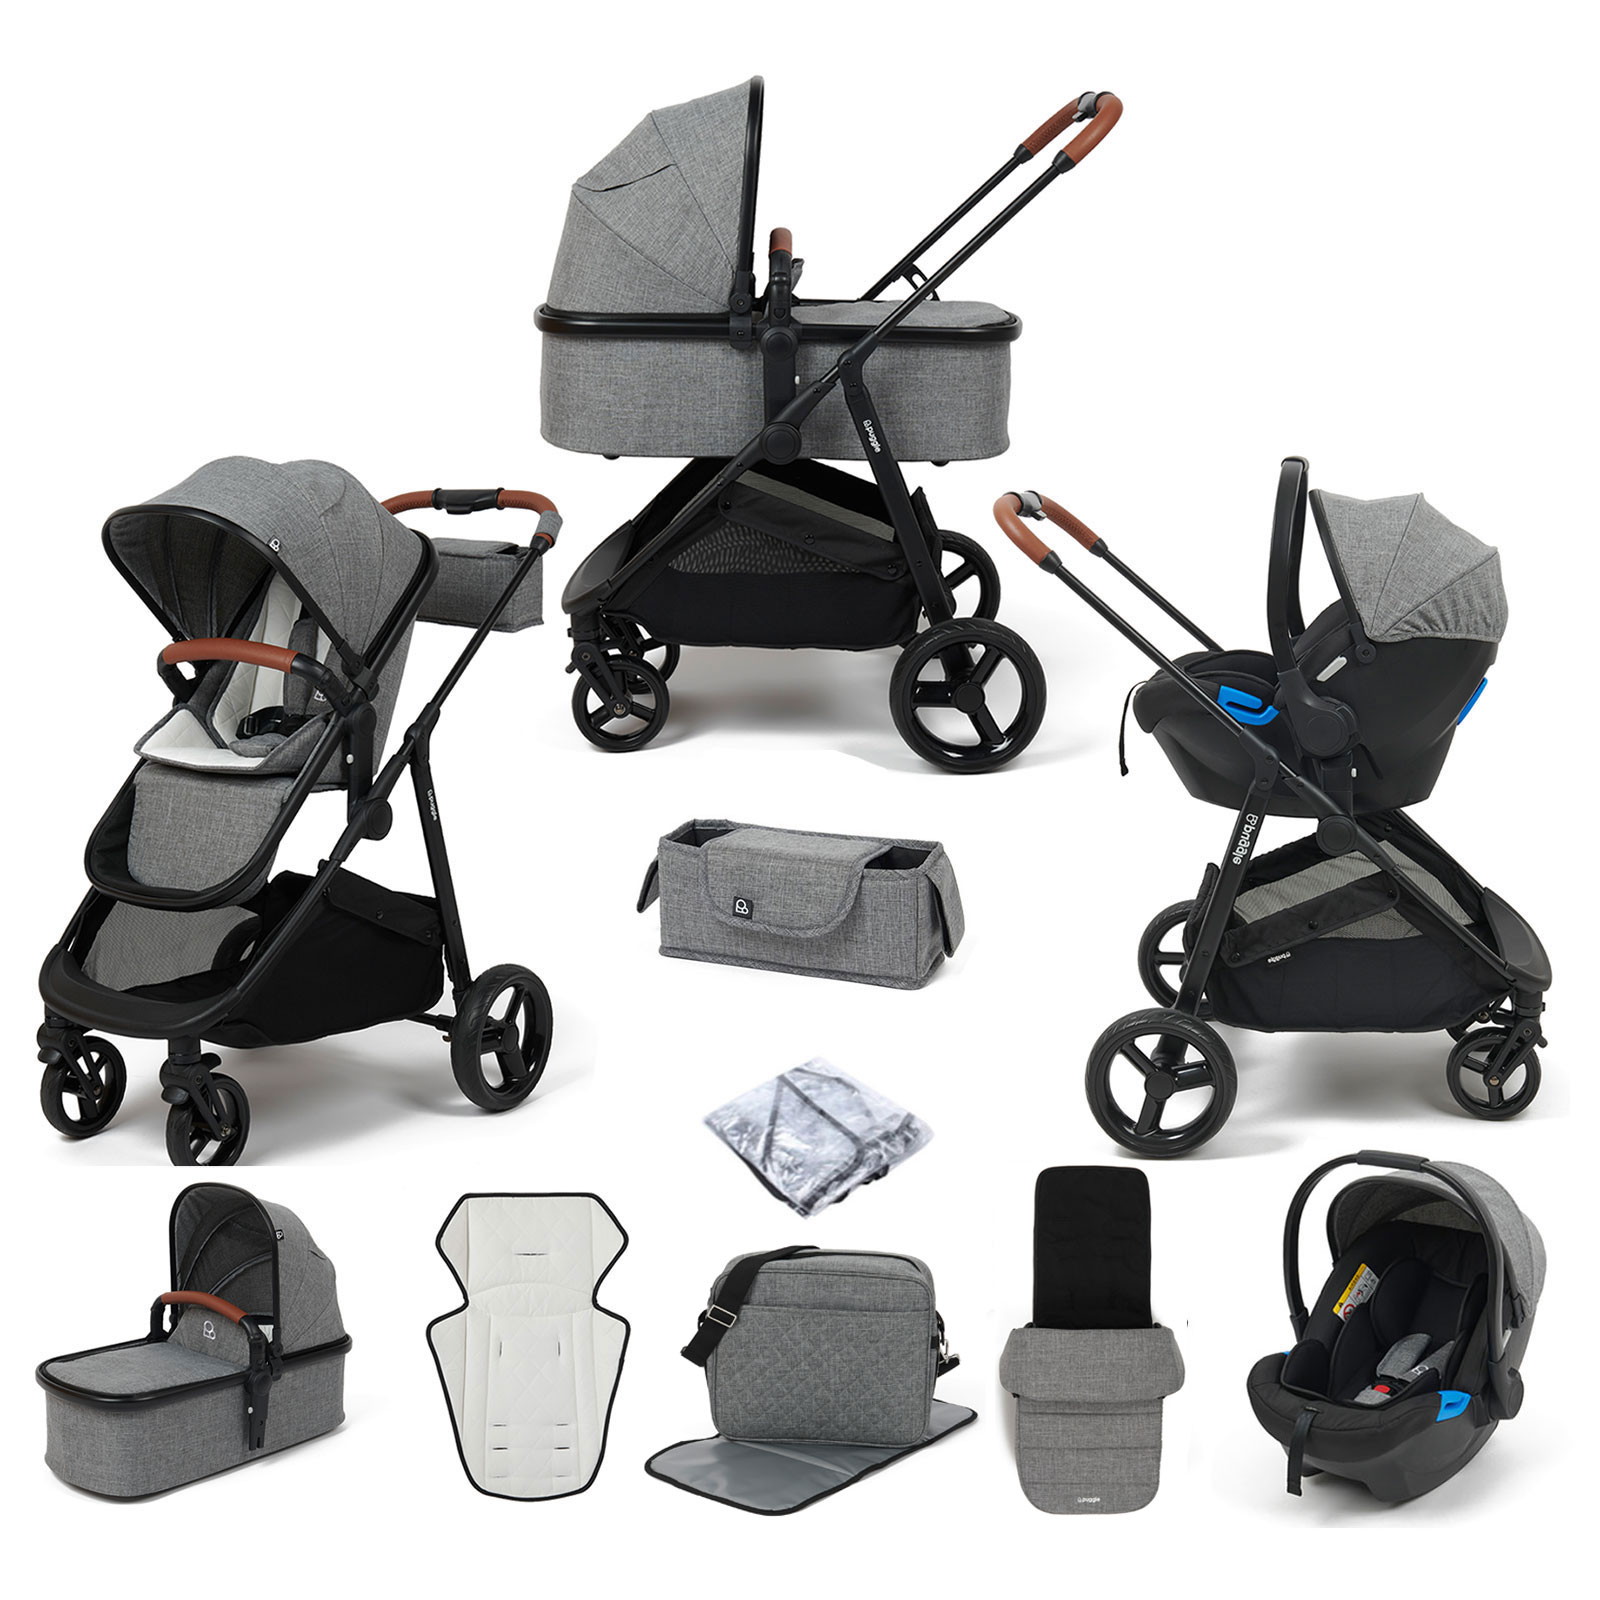 Puggle Monaco XT 3in1 Travel System with Organiser, Footmuff & Changing Bag - Graphite Grey